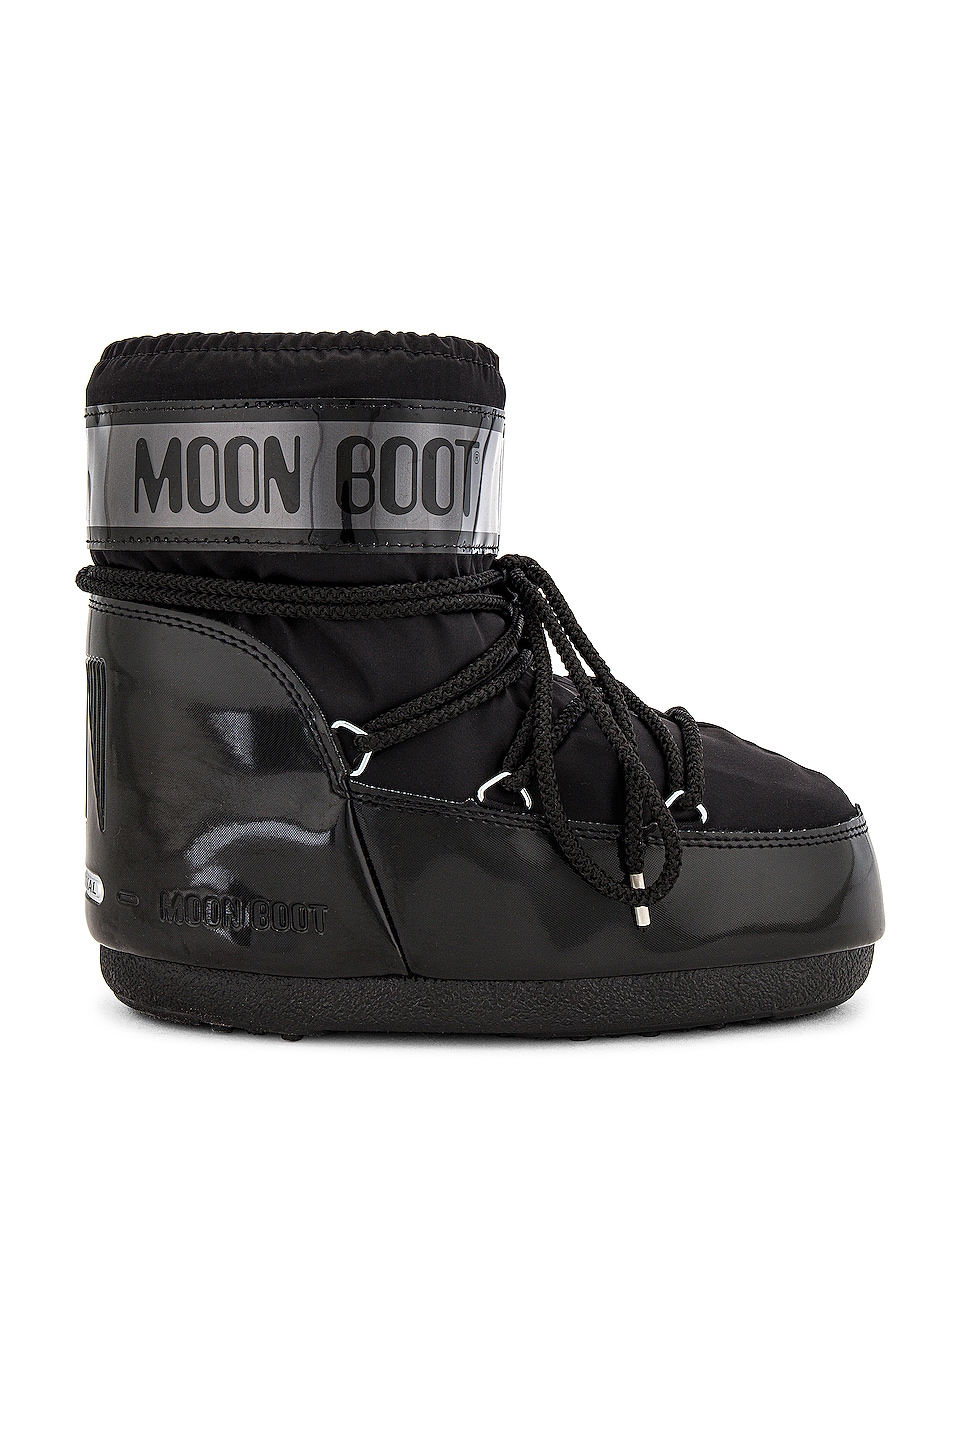 This is how to rock your Moon Boots